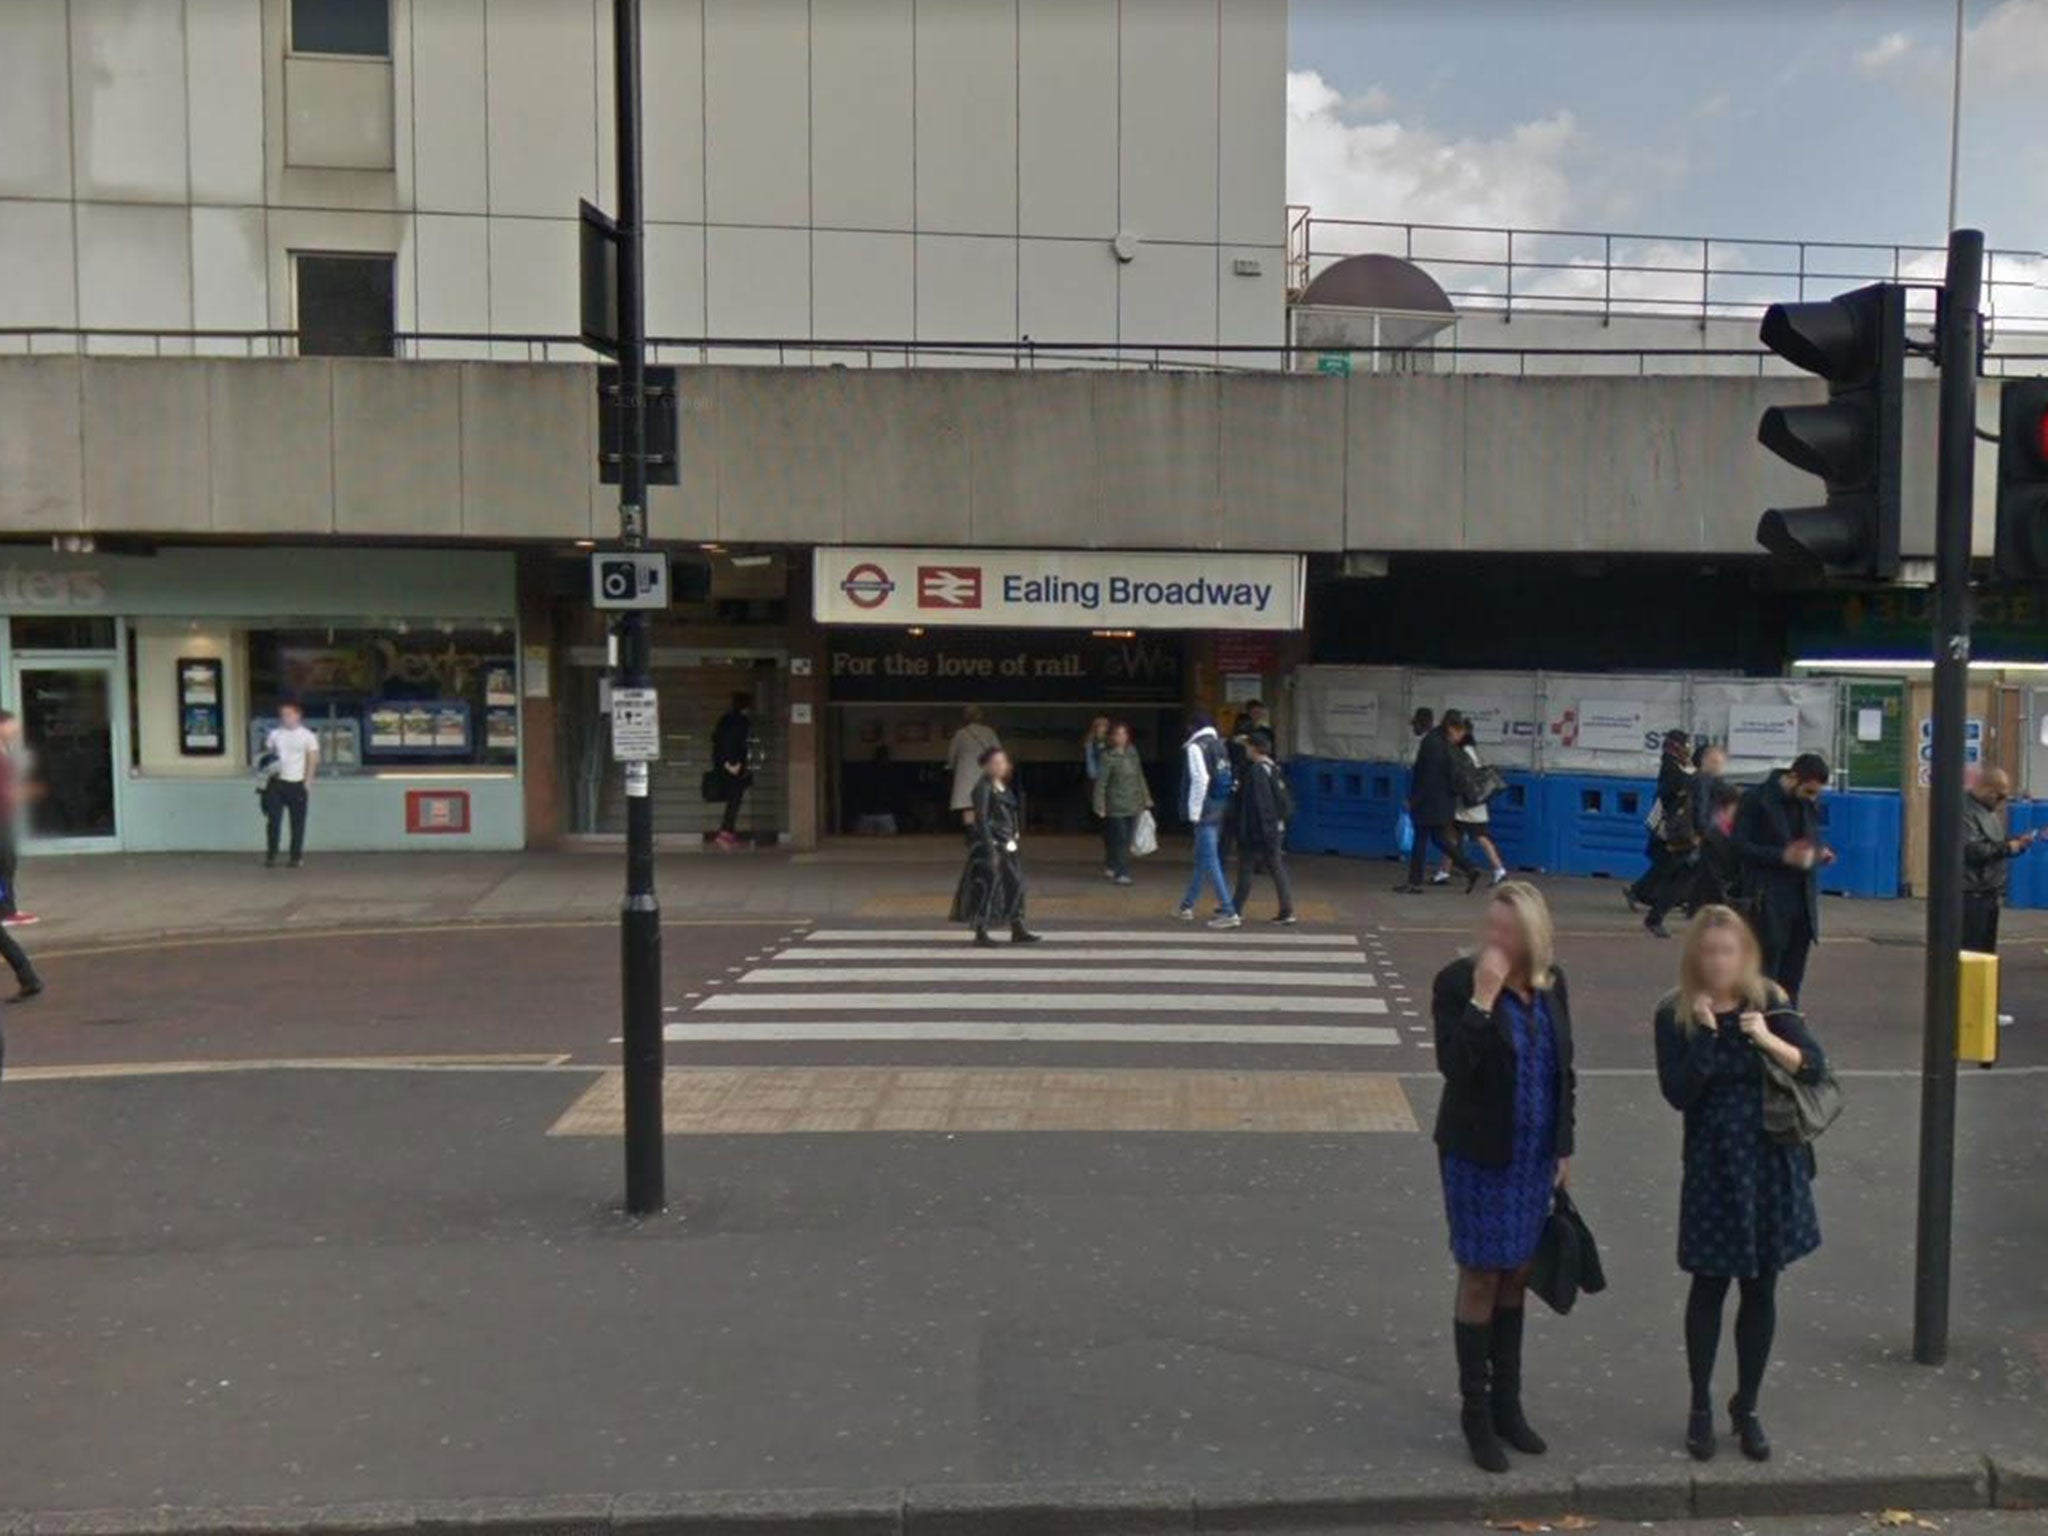 The woman was allegedly kidnapped near Ealing Broadway Tube station in London